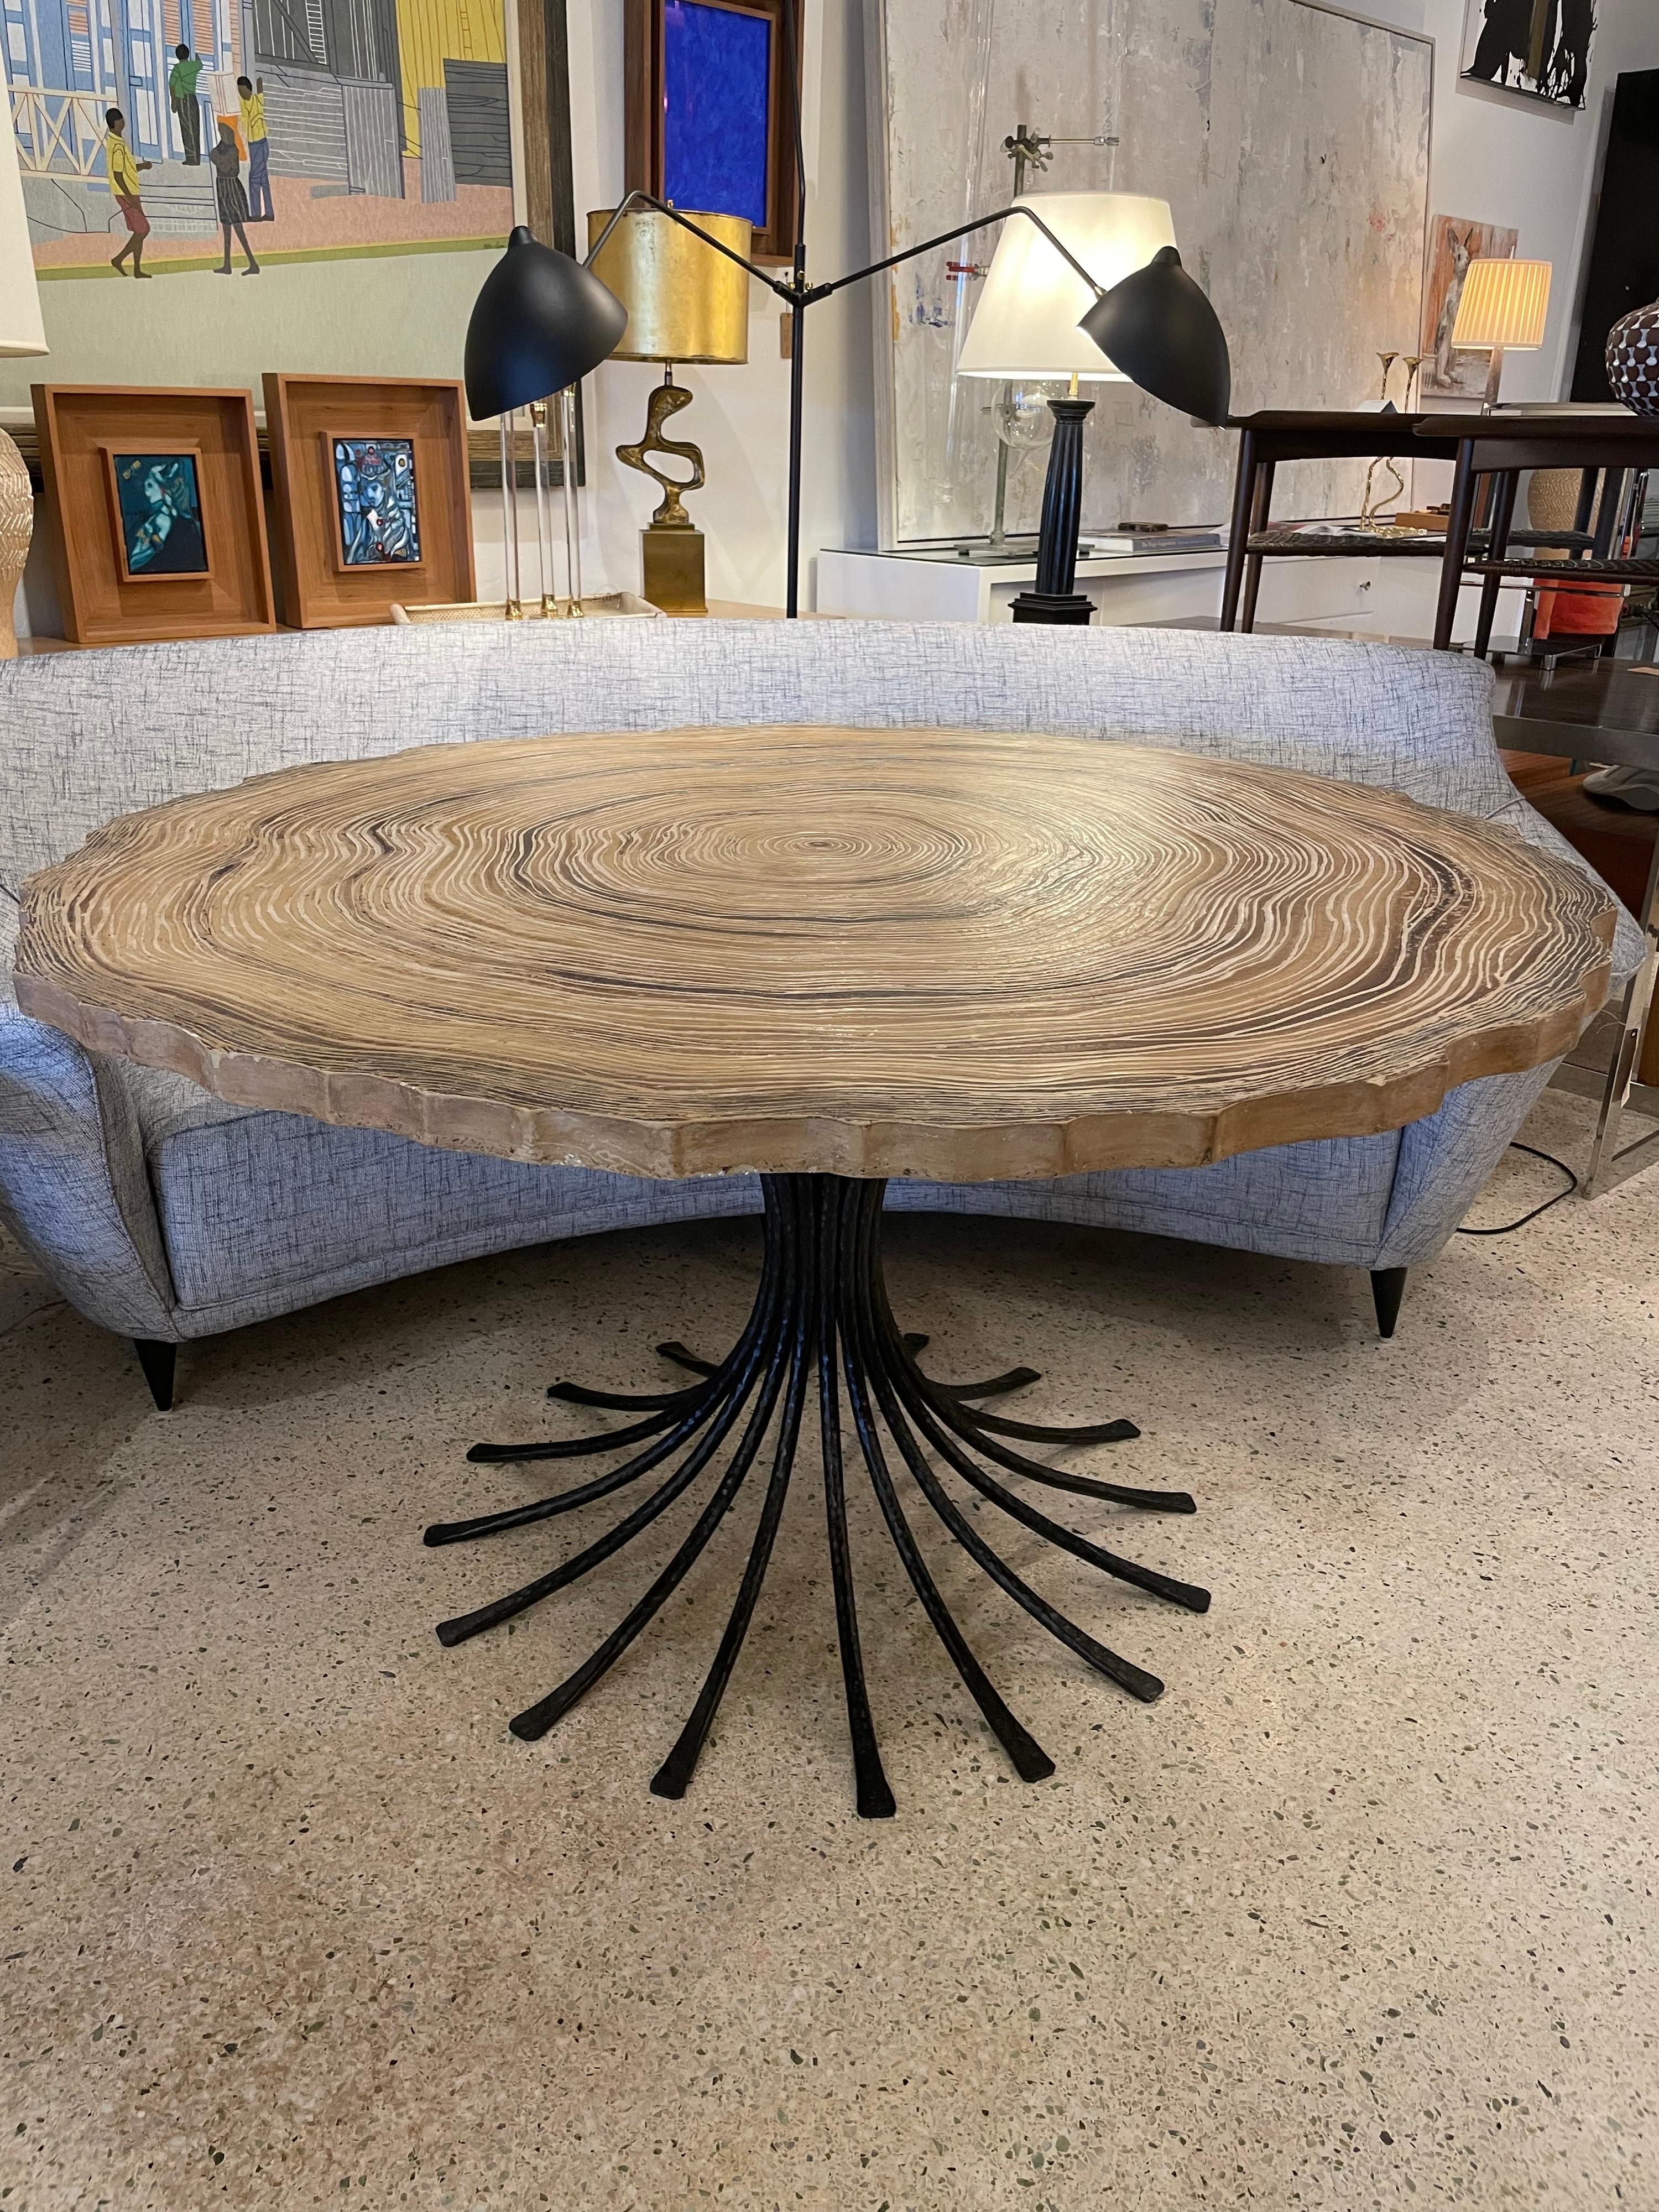 American Trompe L'oeil Tree Trunk Top Dining Table on Iron Base